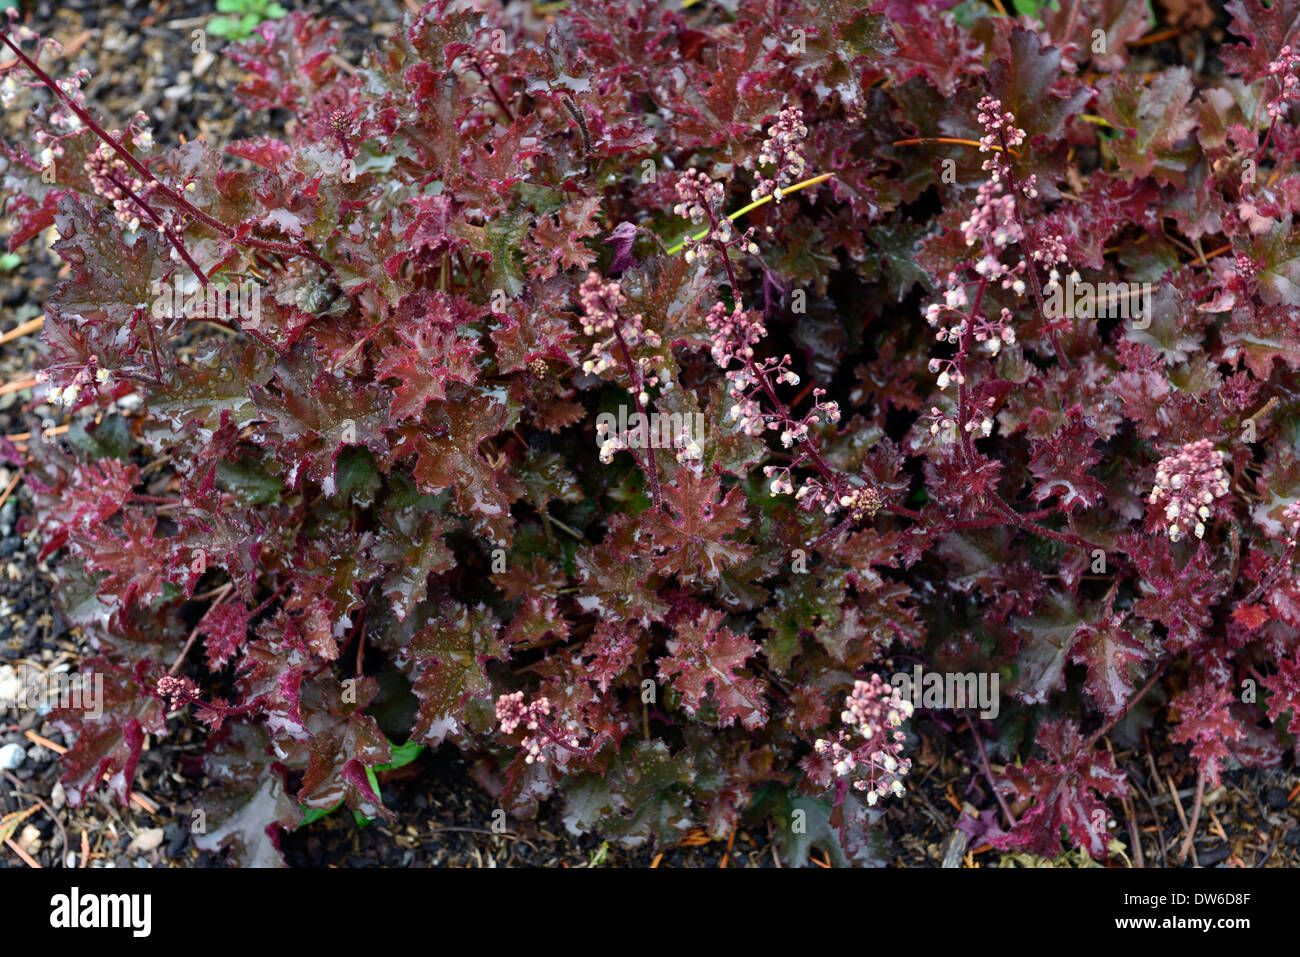 Heuchera crimson curls plant portraits purple pink foliage leaves perennials curly frilled groundcover ground cover Stock Photo